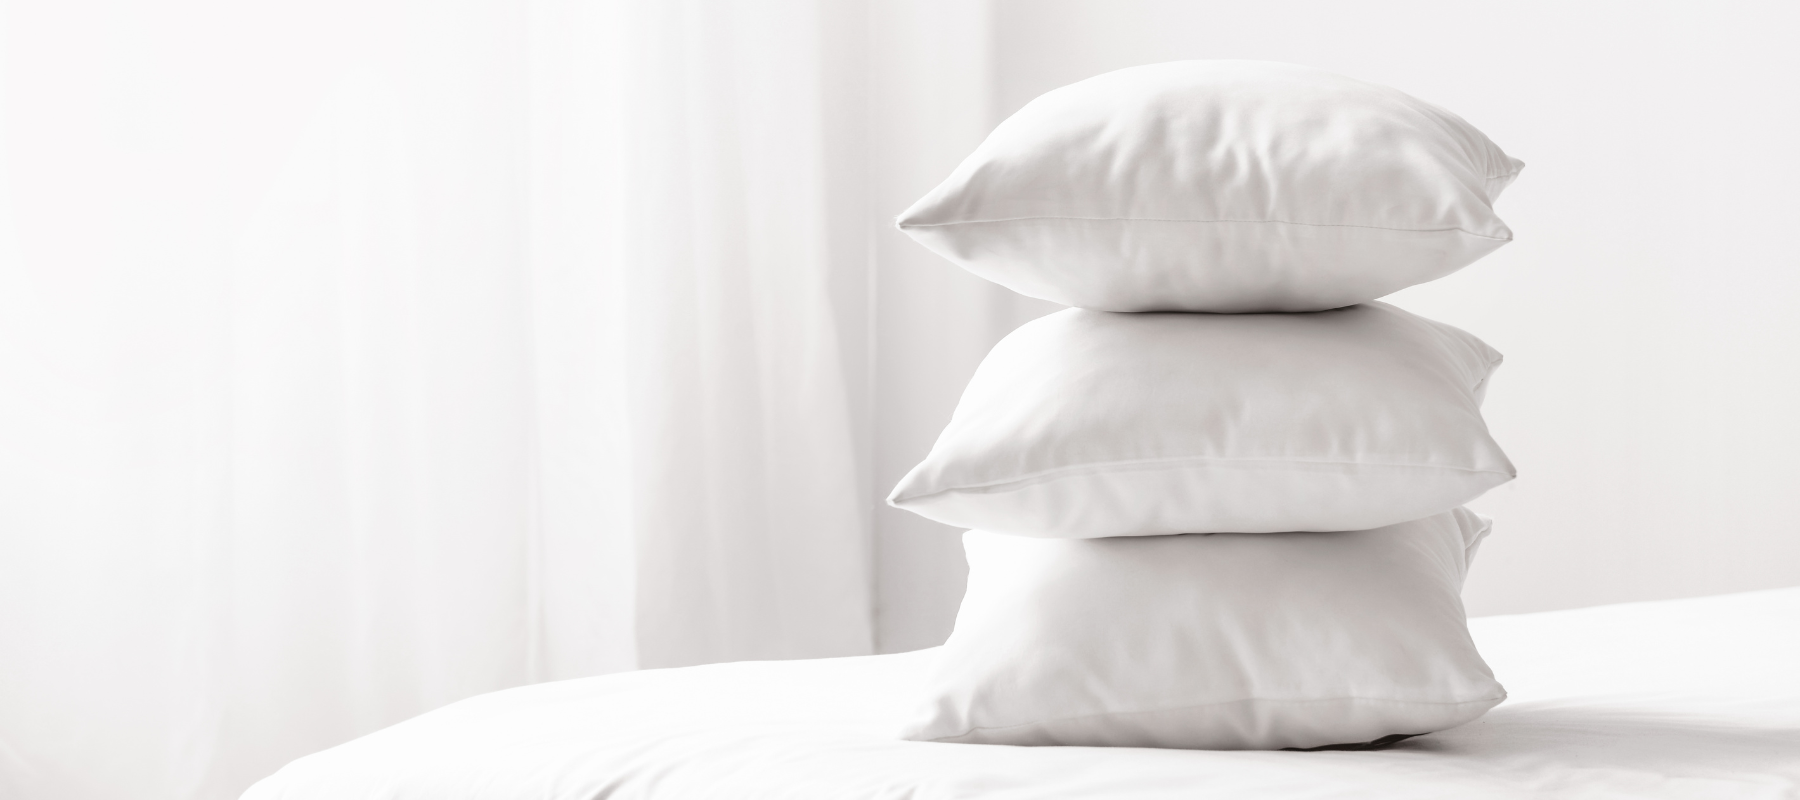 Percale Sheets vs Sateen Sheets: What's the Difference?